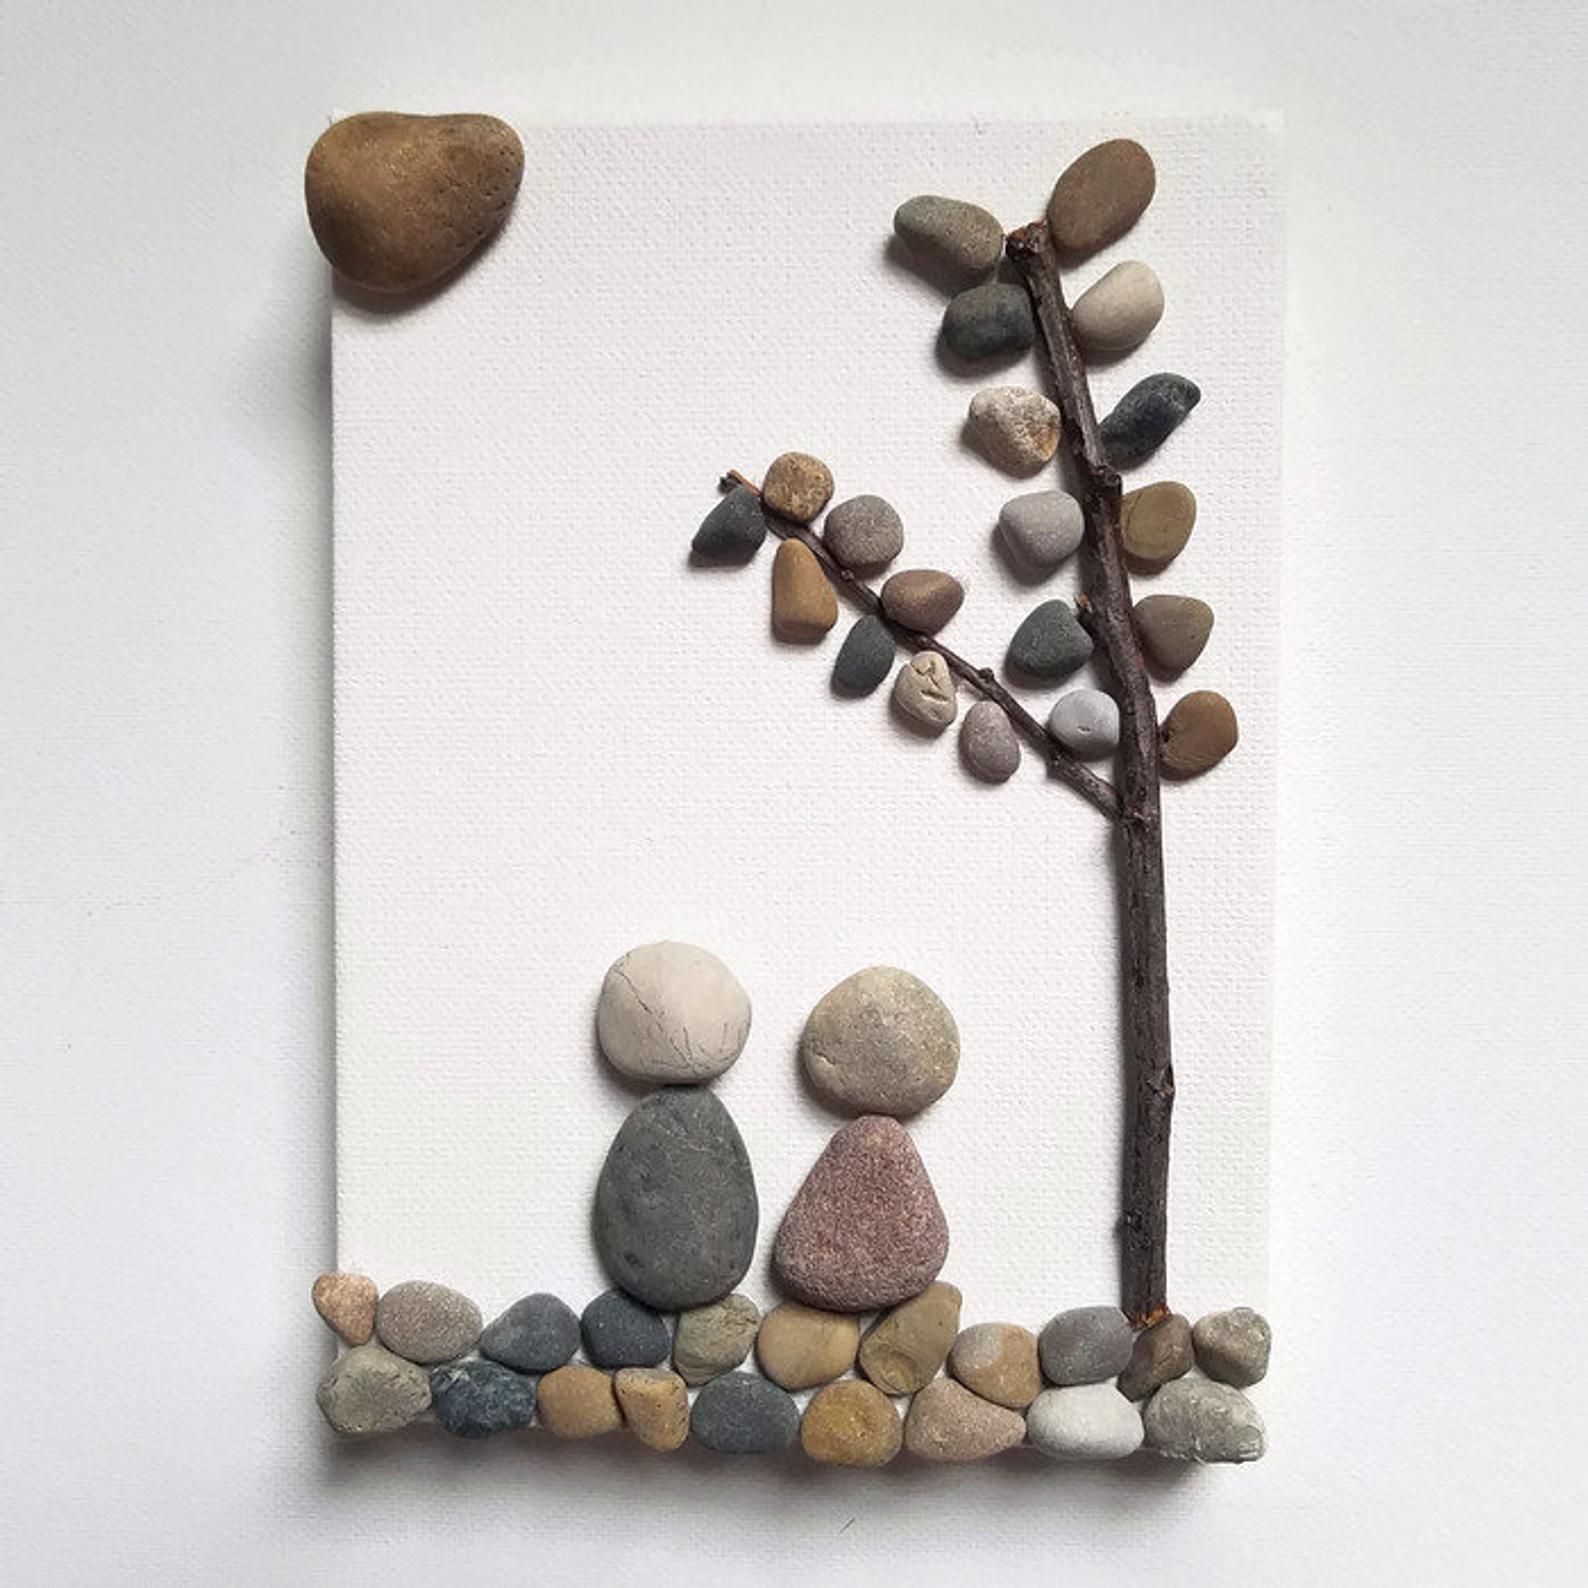 Shells and Stones in Wall Hanging Frame